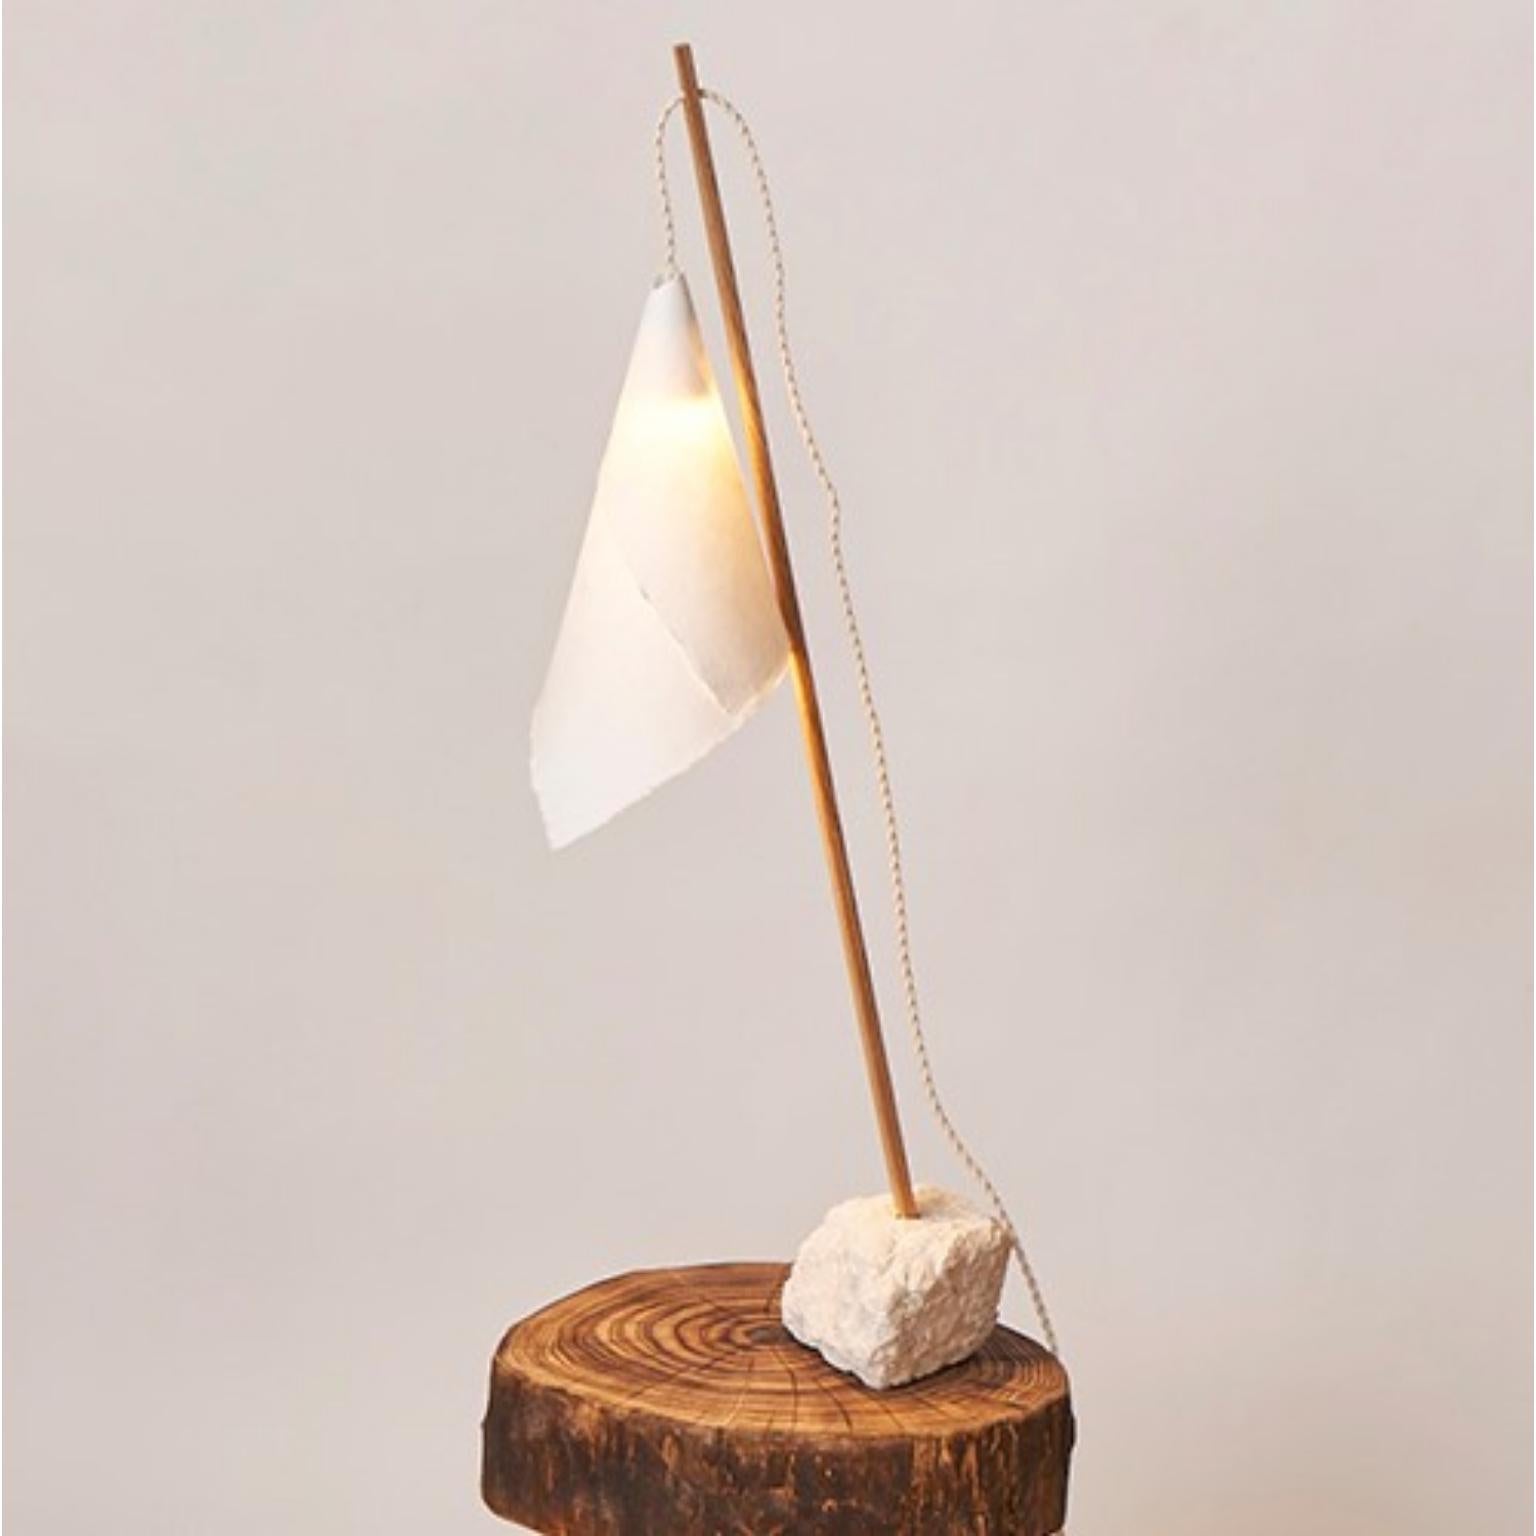 Ibiza table lamp by Jean-Baptiste Van den Heede
Signed, limited edition
Dimensions: 90 cm high
Materials: stone, wood

Design floor and table lamp from the IBIZA collection. Hand-carved stone as well as the wooden shaft and its hand-made paper